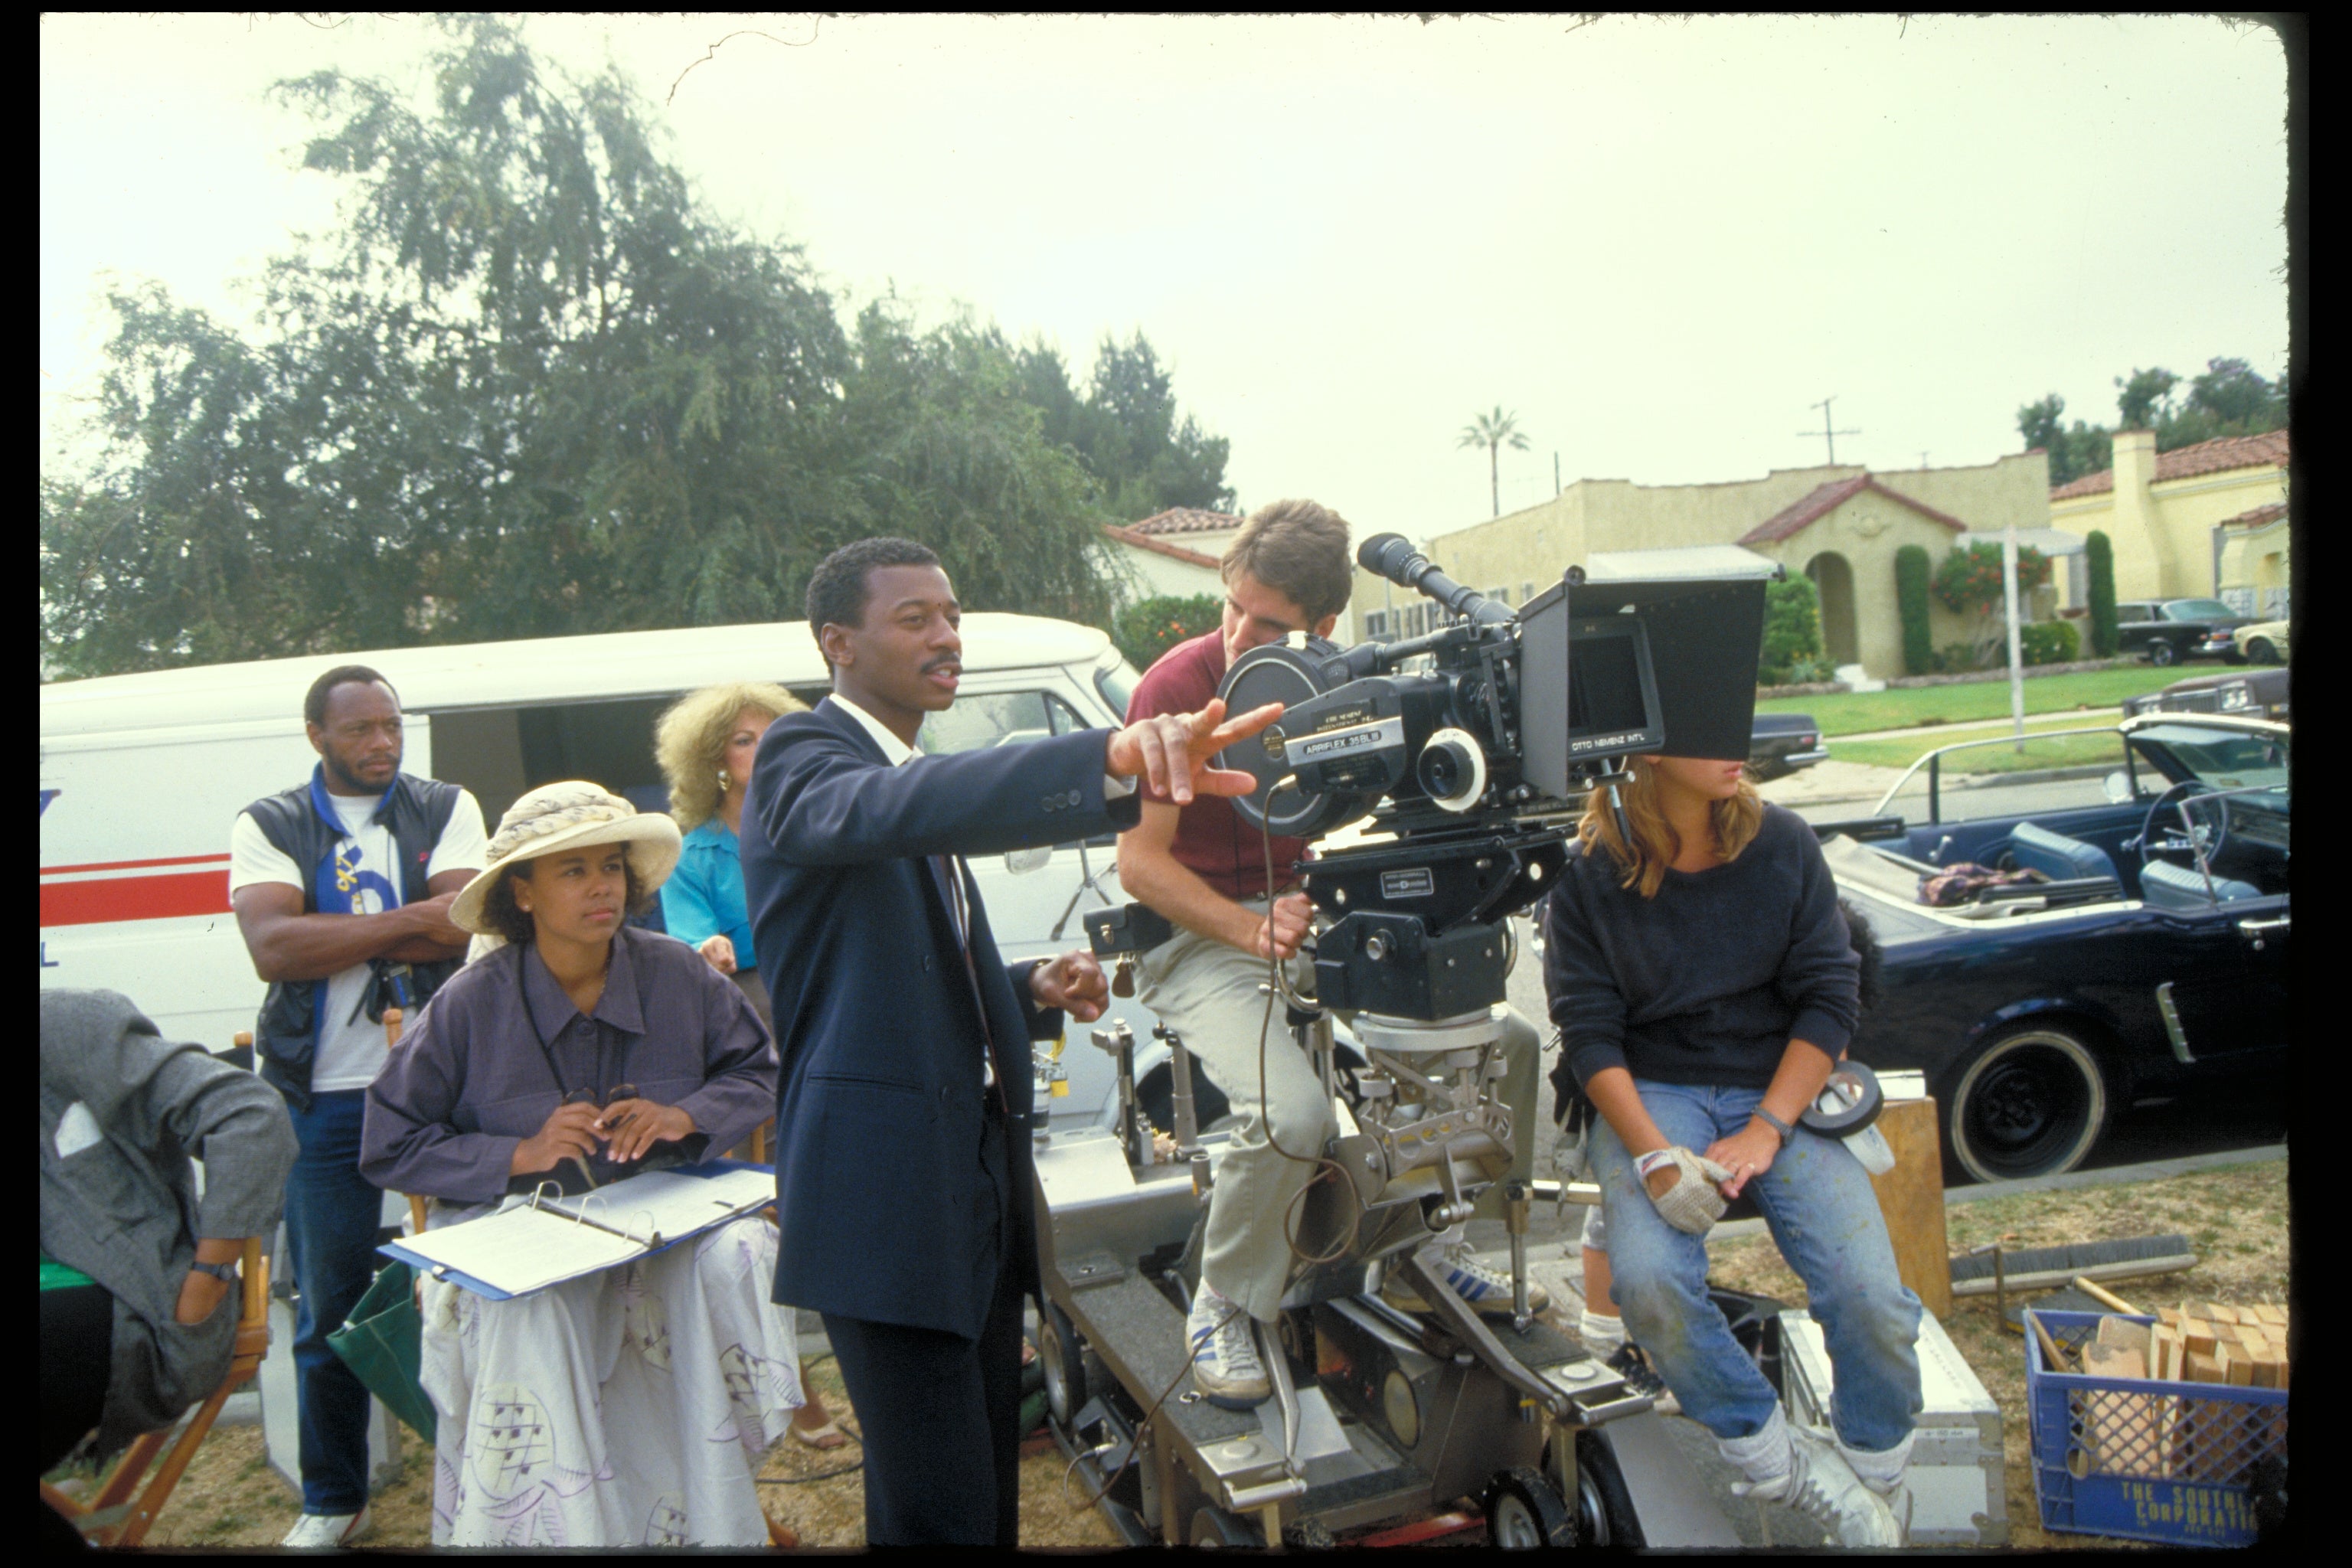 A Black man in a suit stands near a movie camera in a 1980s photograph, surrounded by cast and crew.